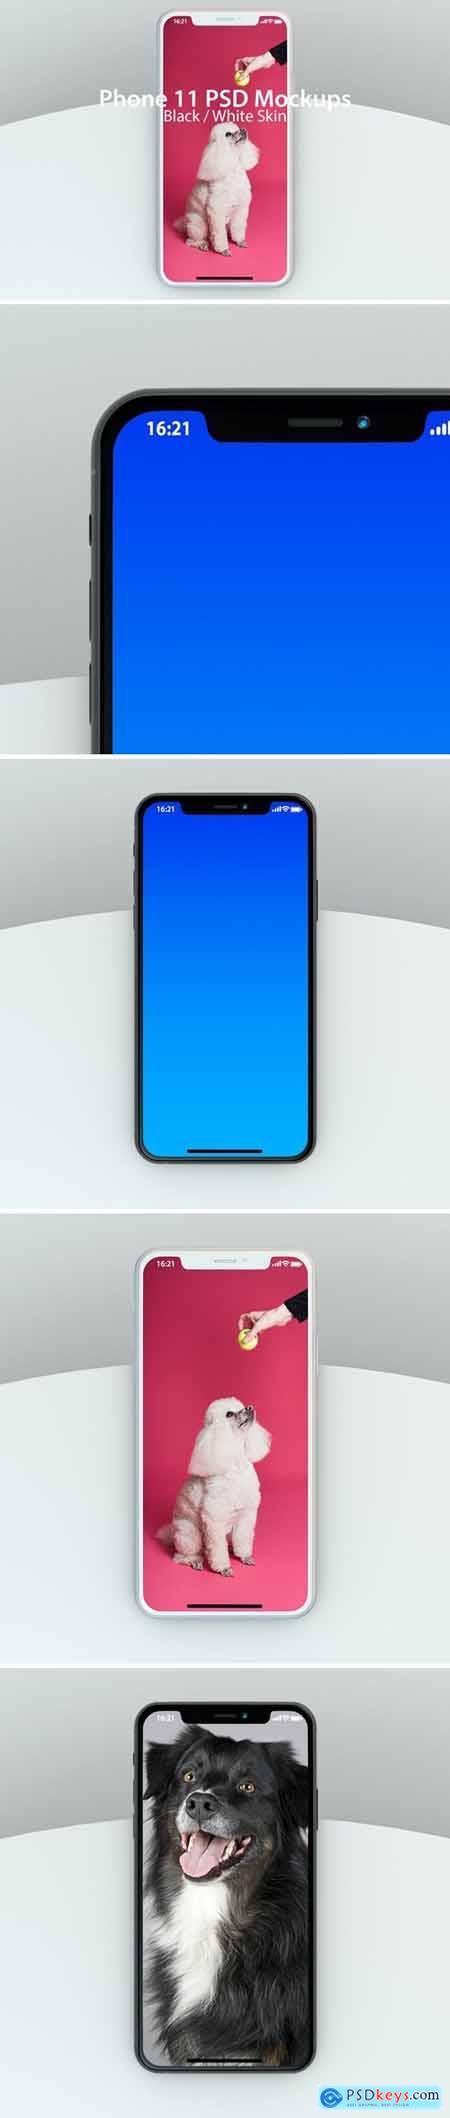 Download iPhone 11 PSD Mock-ups » Free Download Photoshop Vector ...